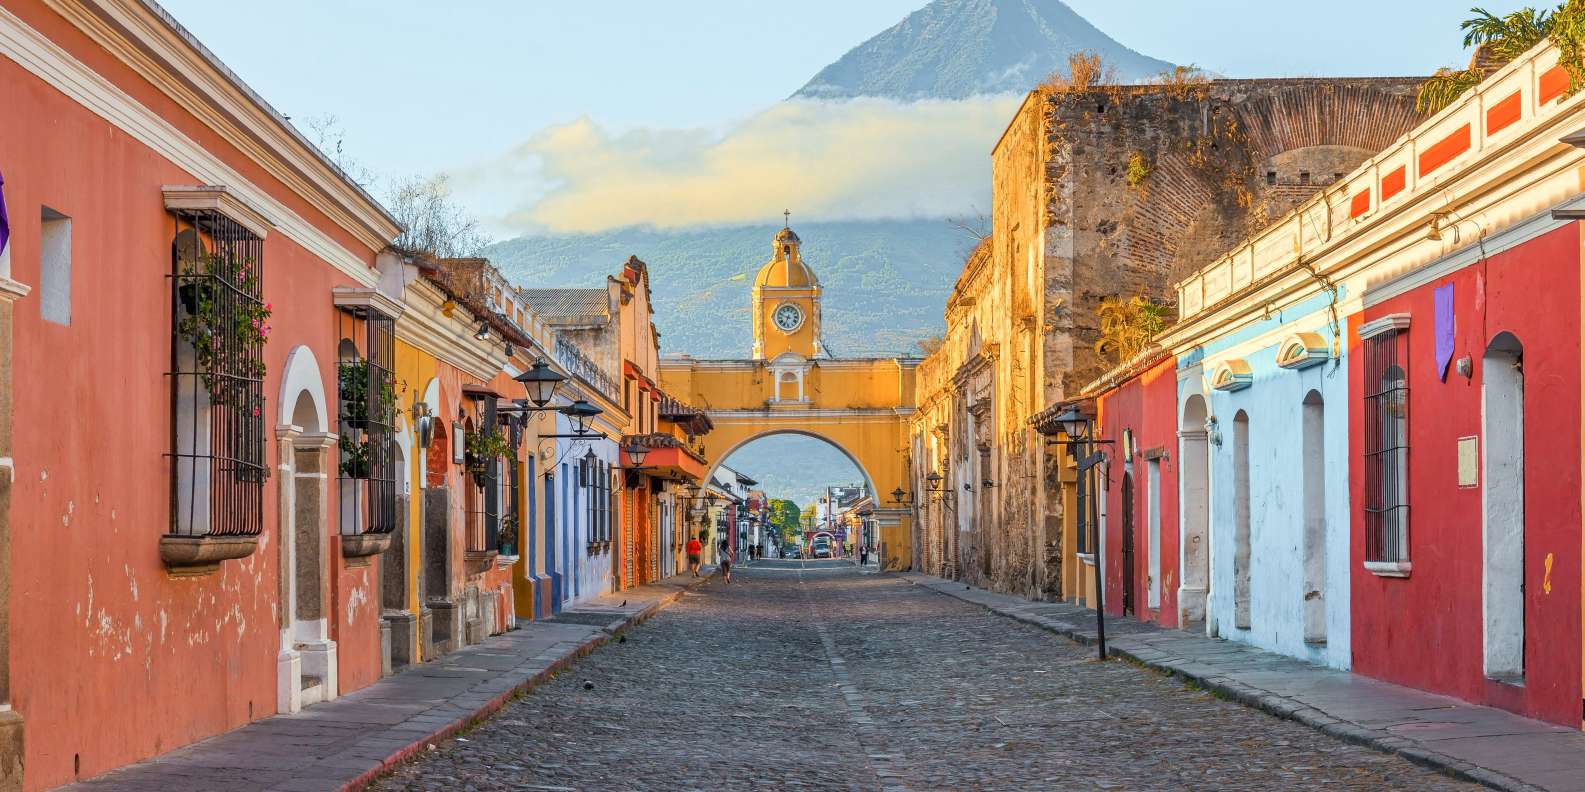 The BEST Guatemala Nature & adventure 2023  FREE Cancellation GetYourGuide